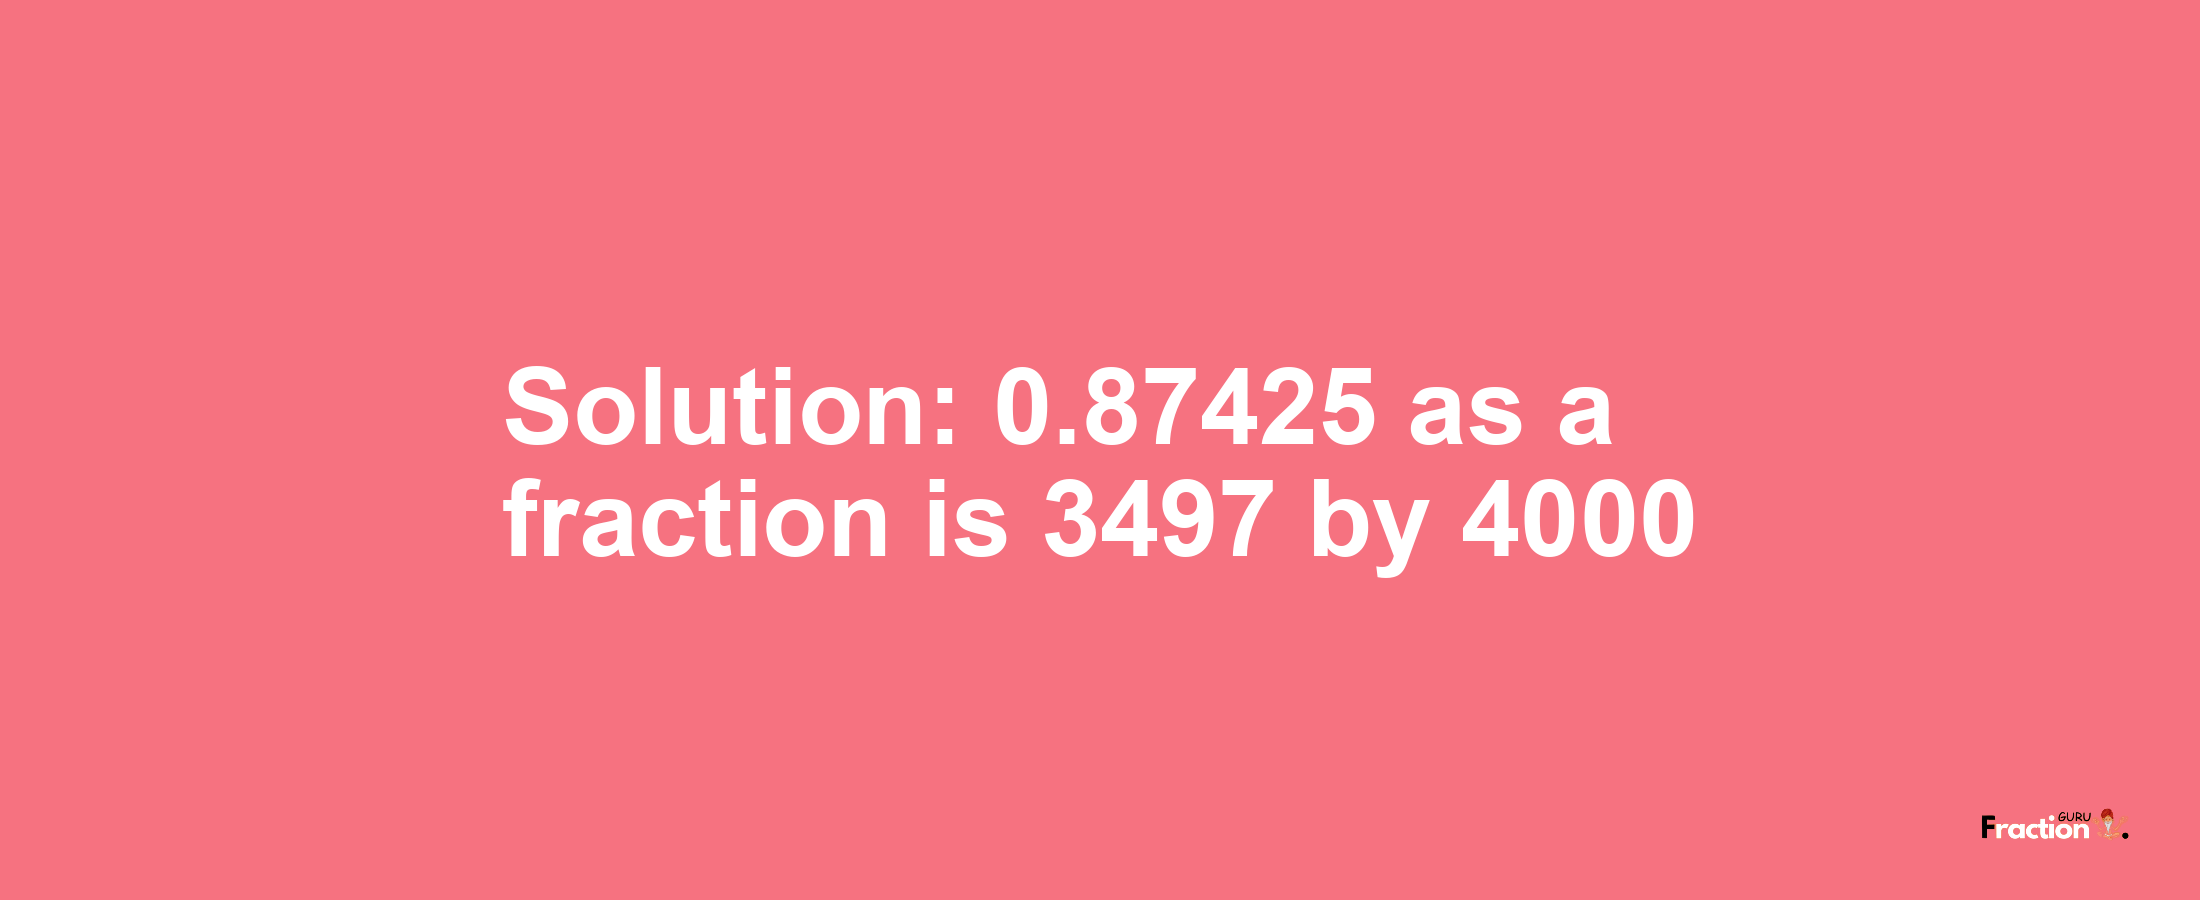 Solution:0.87425 as a fraction is 3497/4000